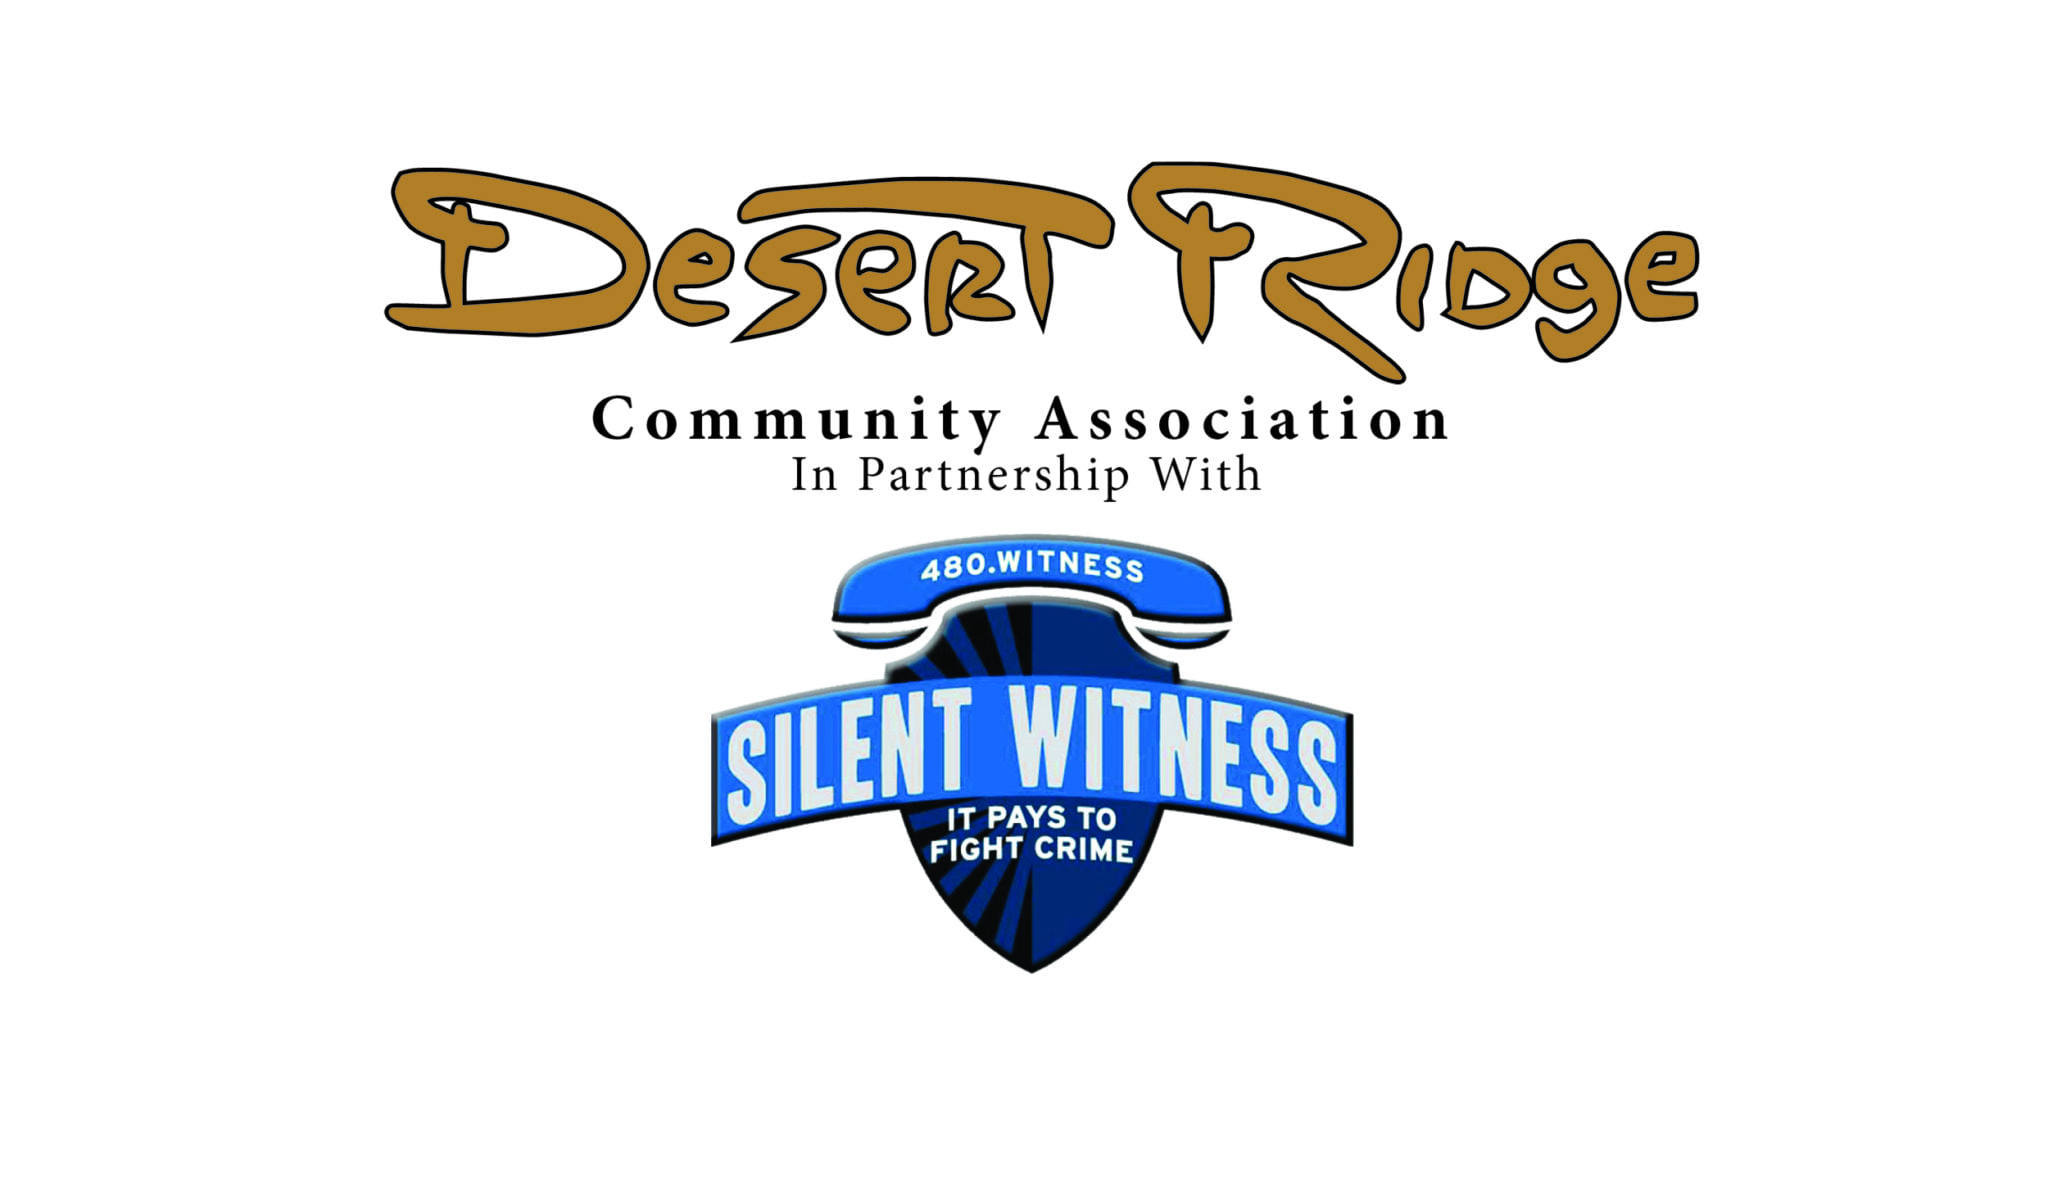 “Crime Doesn’t Pay In Desert Ridge…Reporting It Does!” – Click to watch video